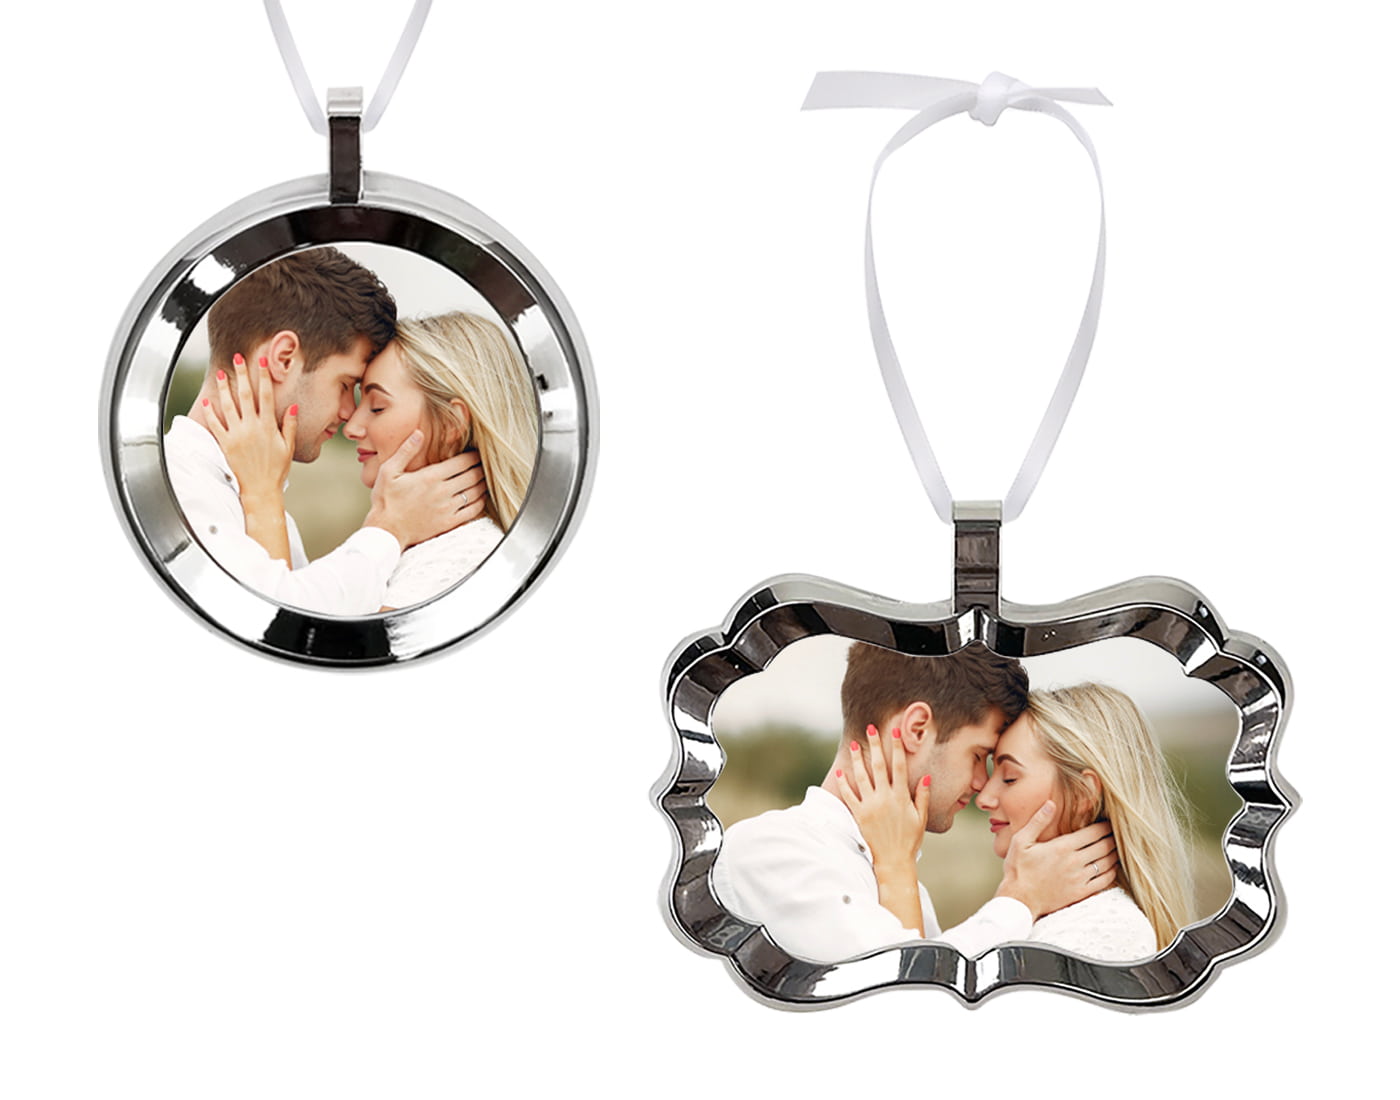 Ornaments - Personalized Christmas Ornaments